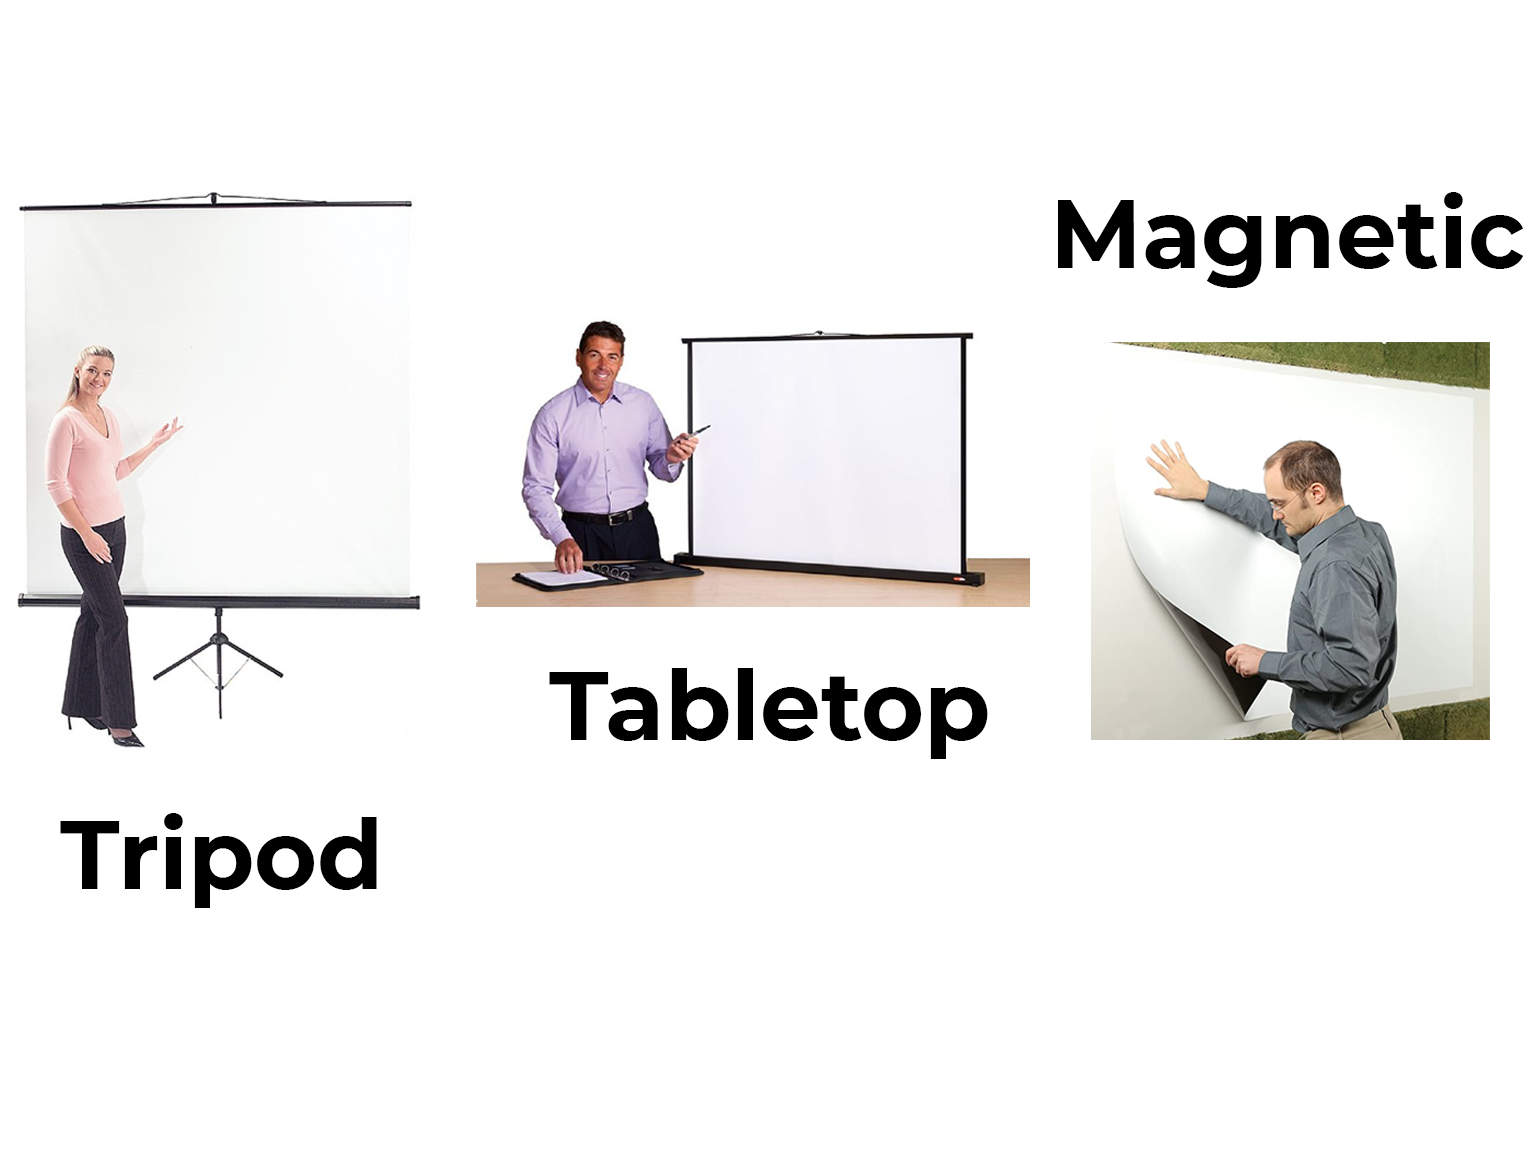 Tripod, Tabletop and Magnetic Projector screen examples demonstrated with 3 different pictures of people using them